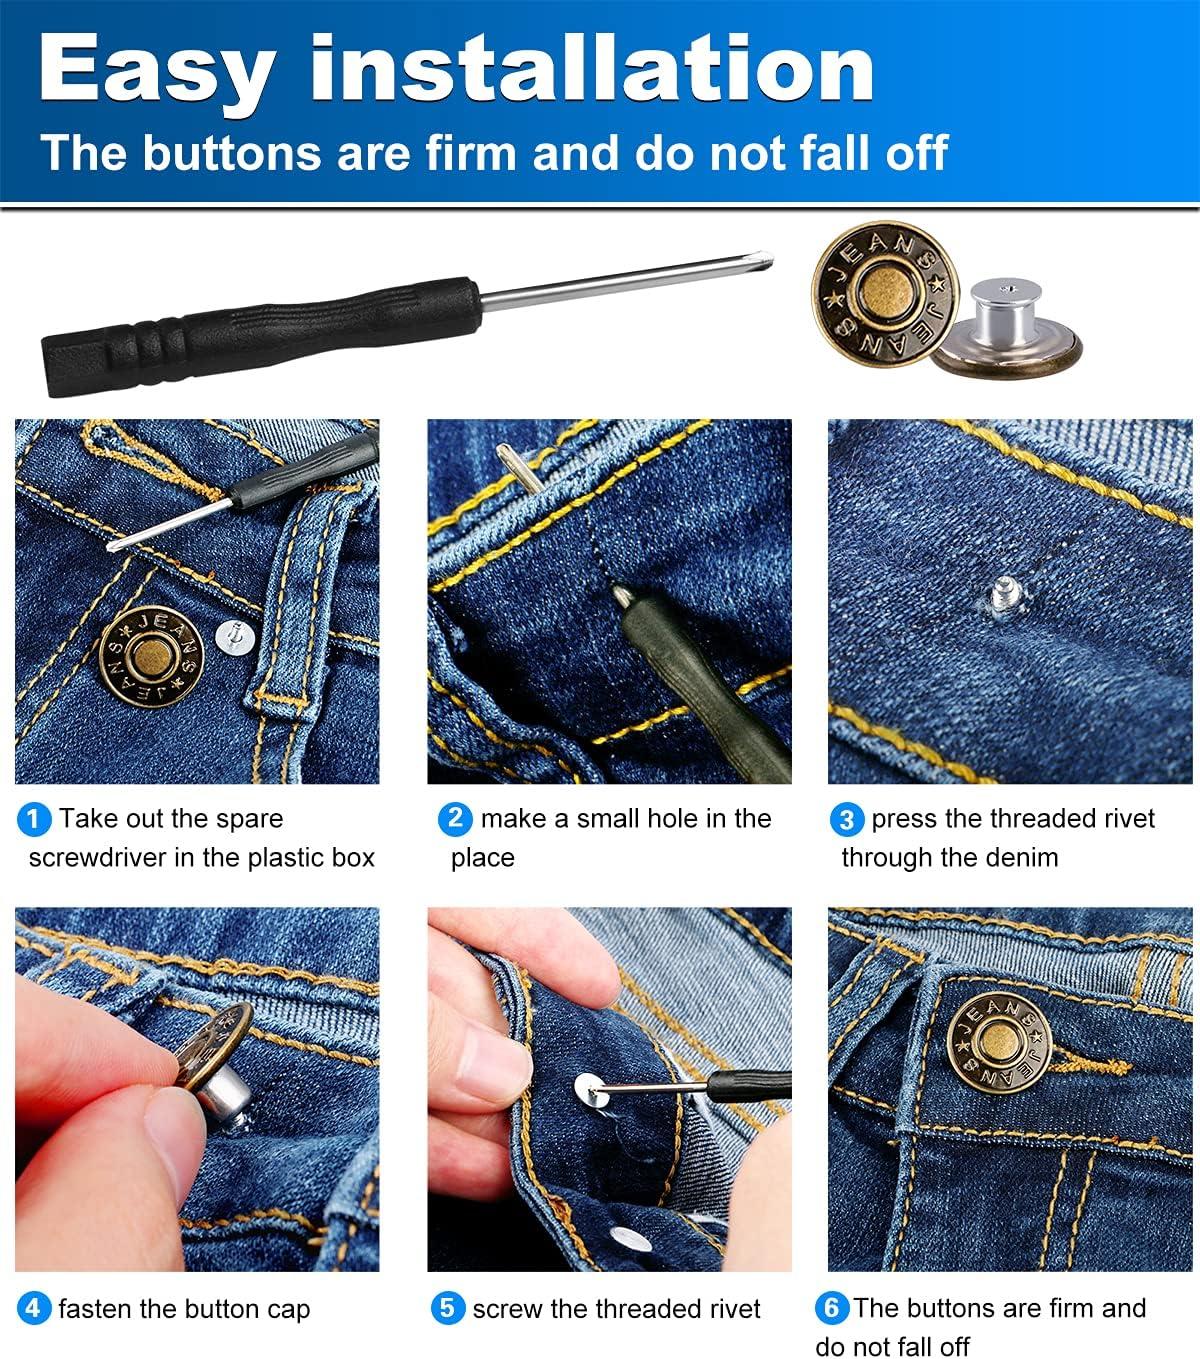 Jeans Button Replacement No Sew: YUANHANG 24 Sets Metal Buttons for Pants -  Instant Adjustable Button - Tighten Waist Size by 1 Inch or Extend an Extra  Inch - Contains A Removable Screwdriver